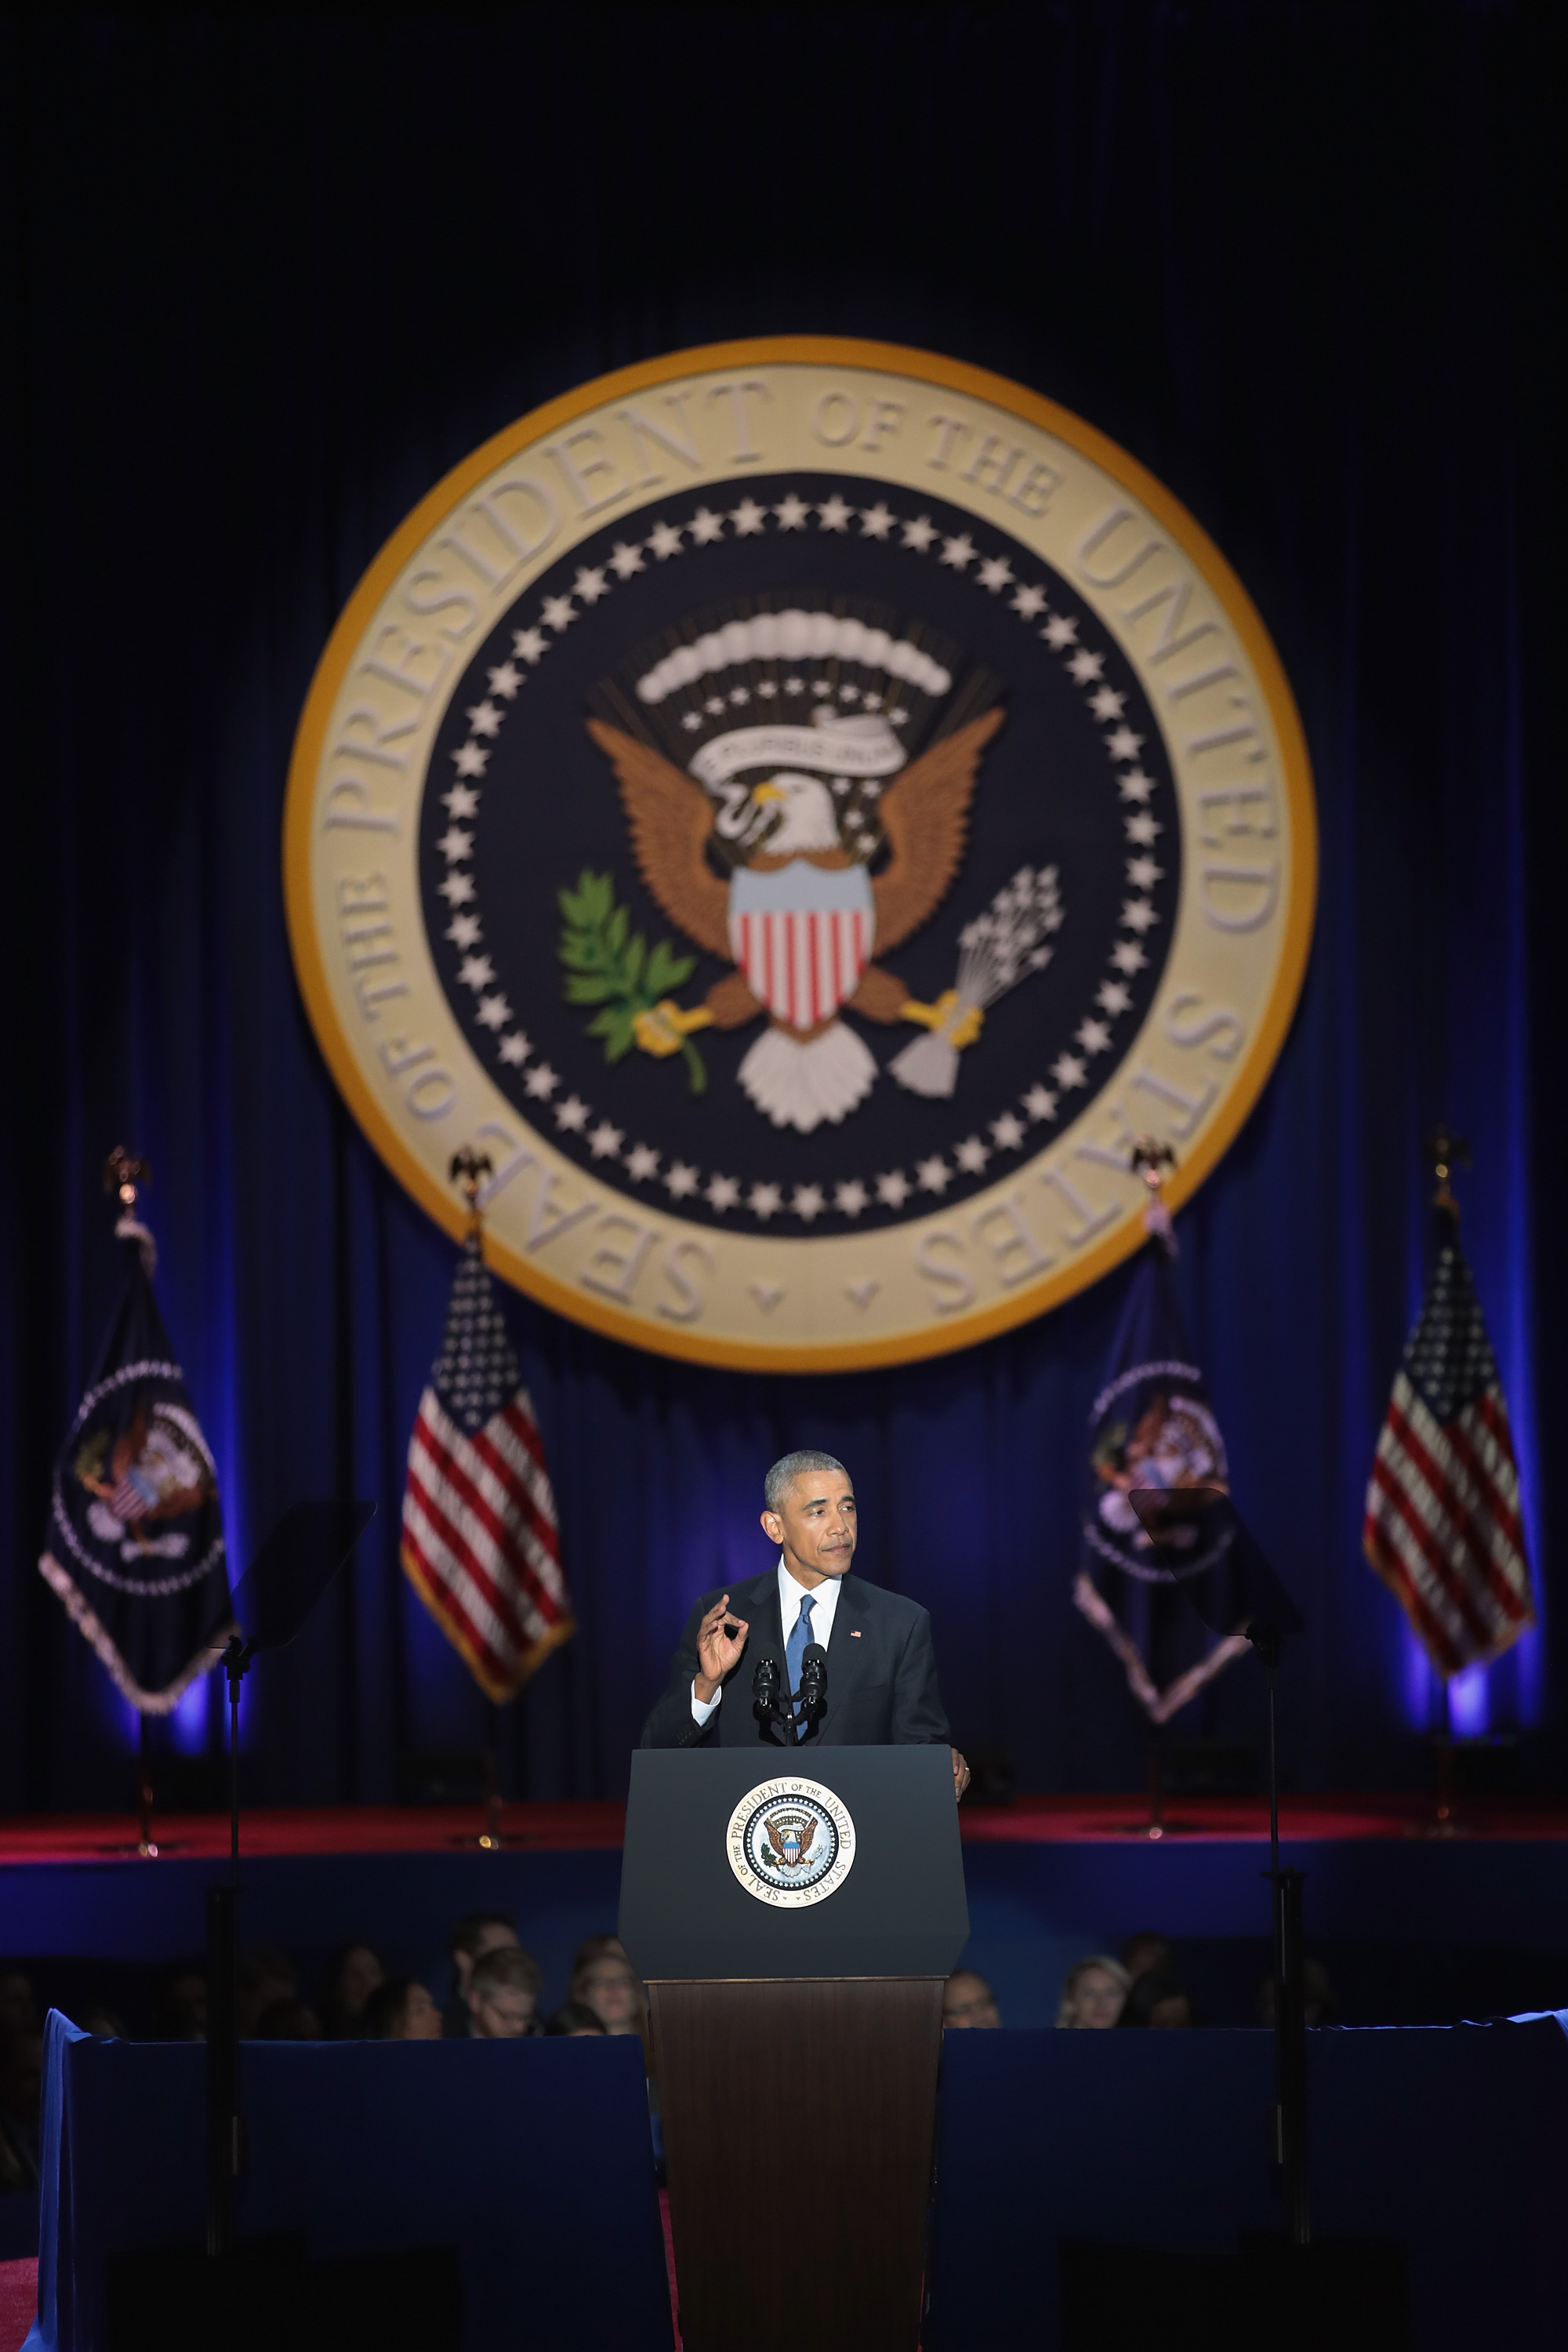 CHICAGO, IL - JANUARY 10: President Barack Obama delivers a farewell speech to the nation on January 10, 2017 in Chicago, Illinois. President-elect Donald Trump will be sworn in the as the 45th president on January 20.   Scott Olson/Getty Images/AFP